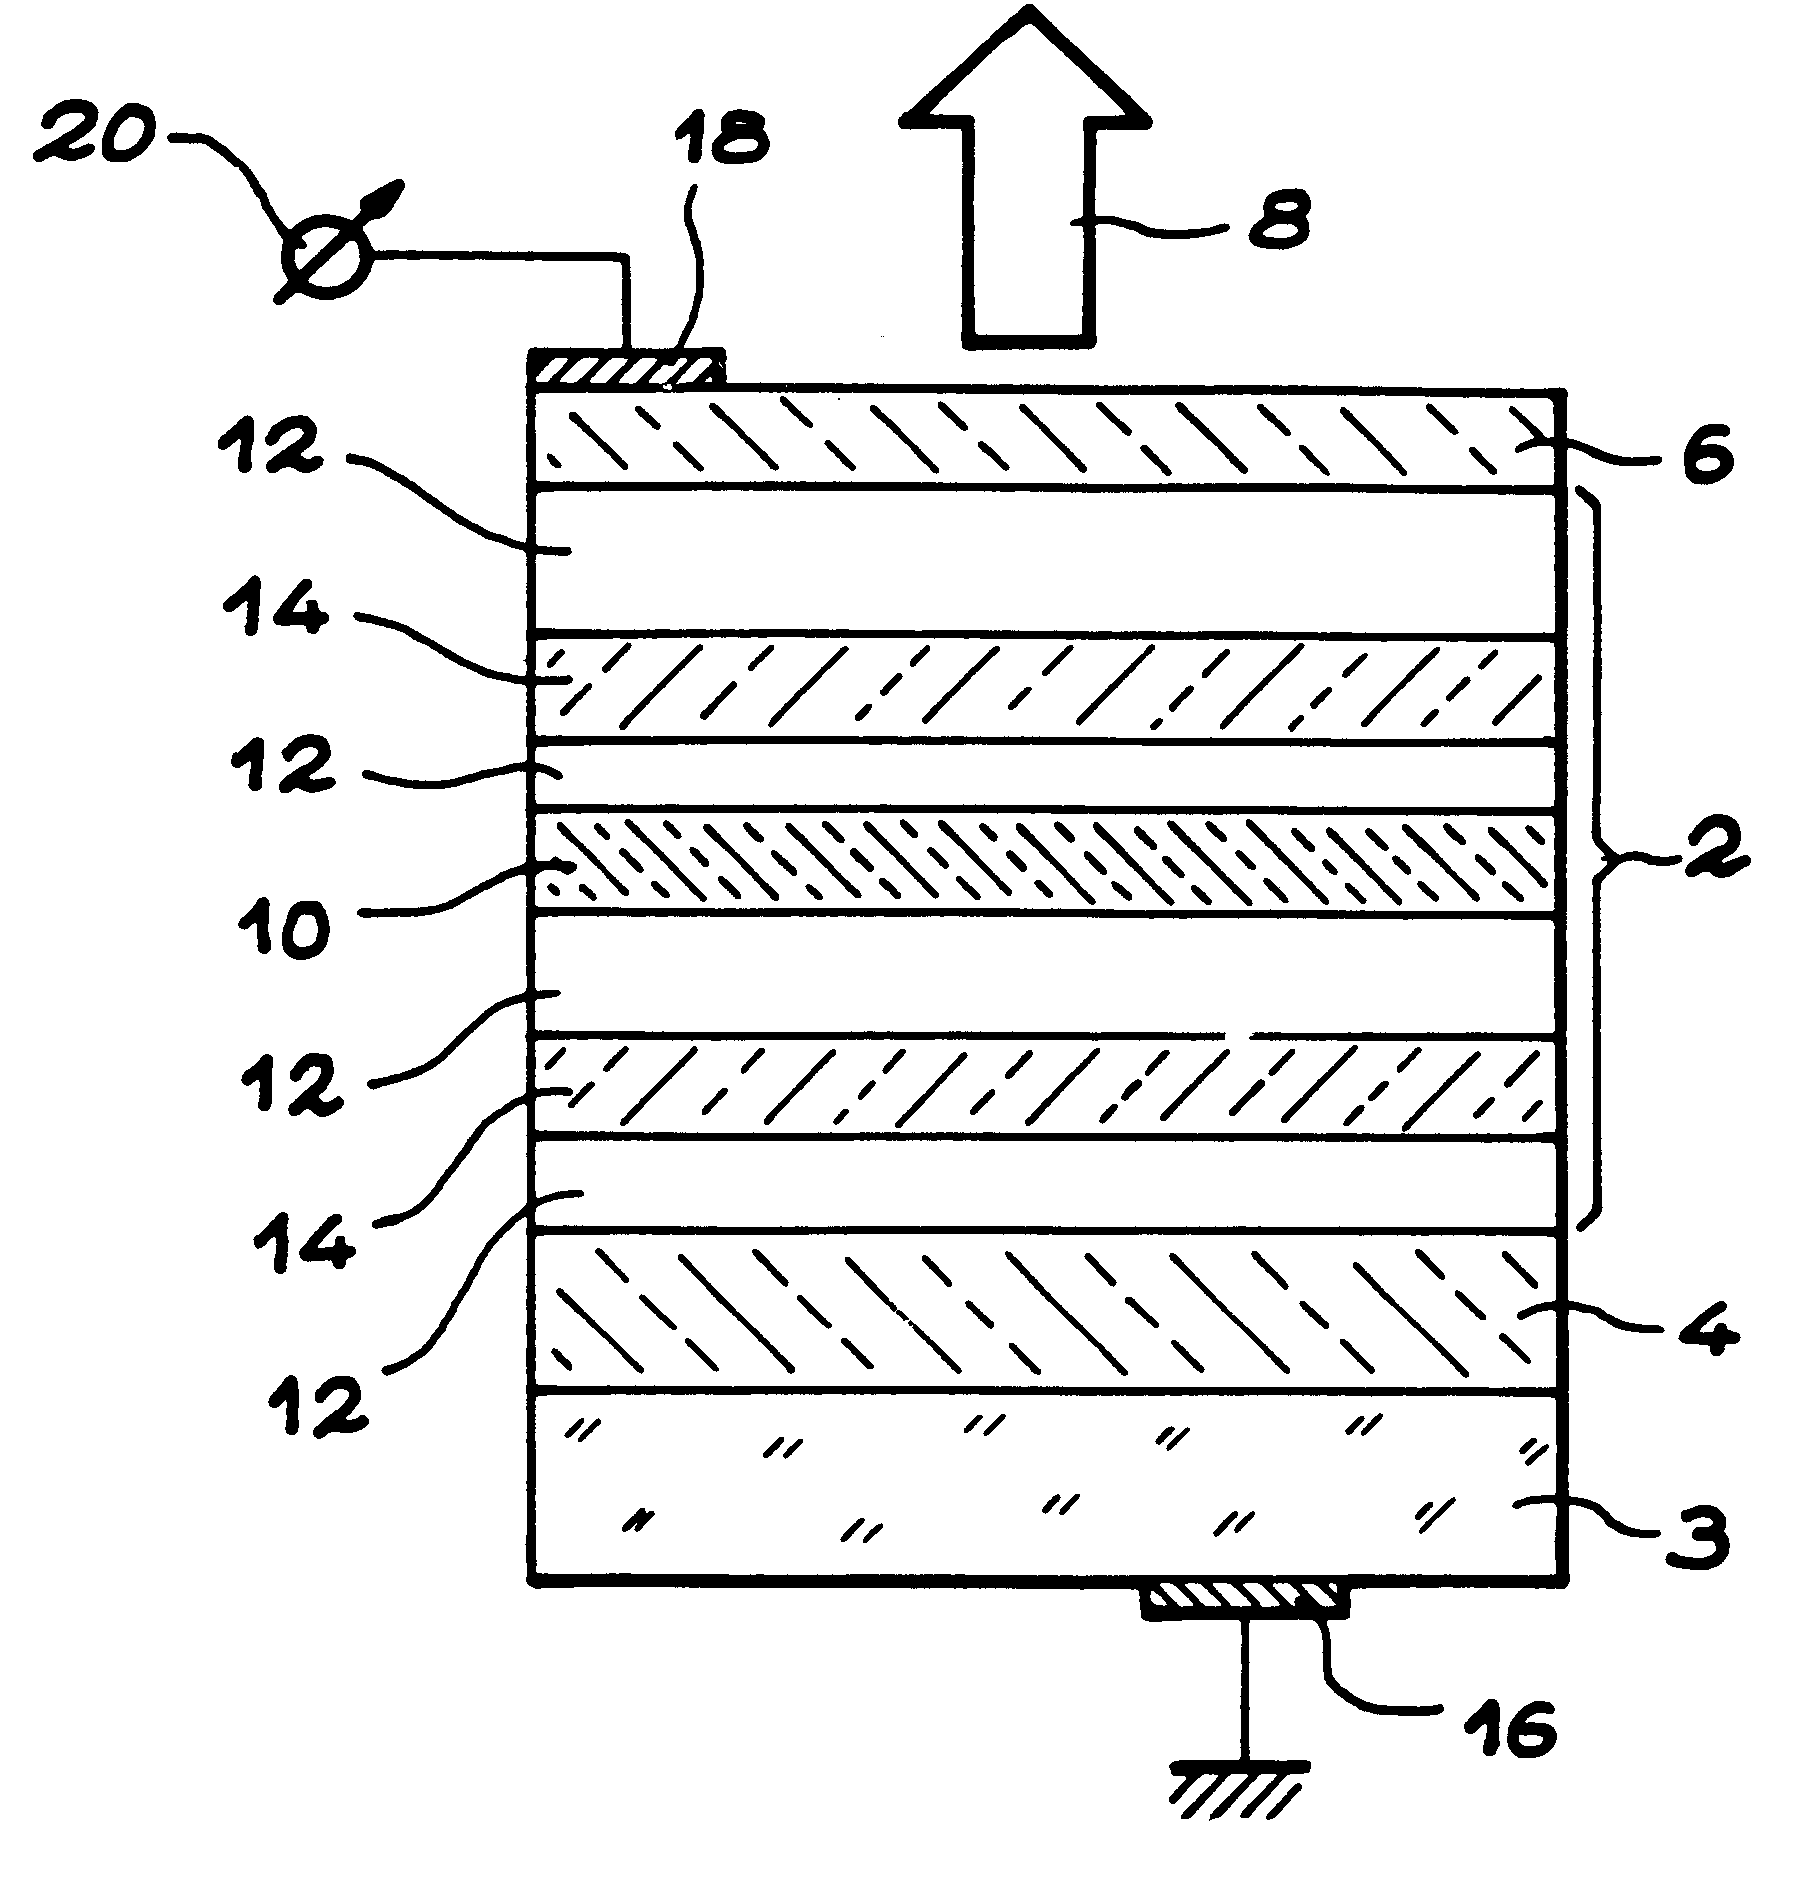 Optical semiconductor device with resonant cavity tunable in wavelength, application to modulation of light intensity